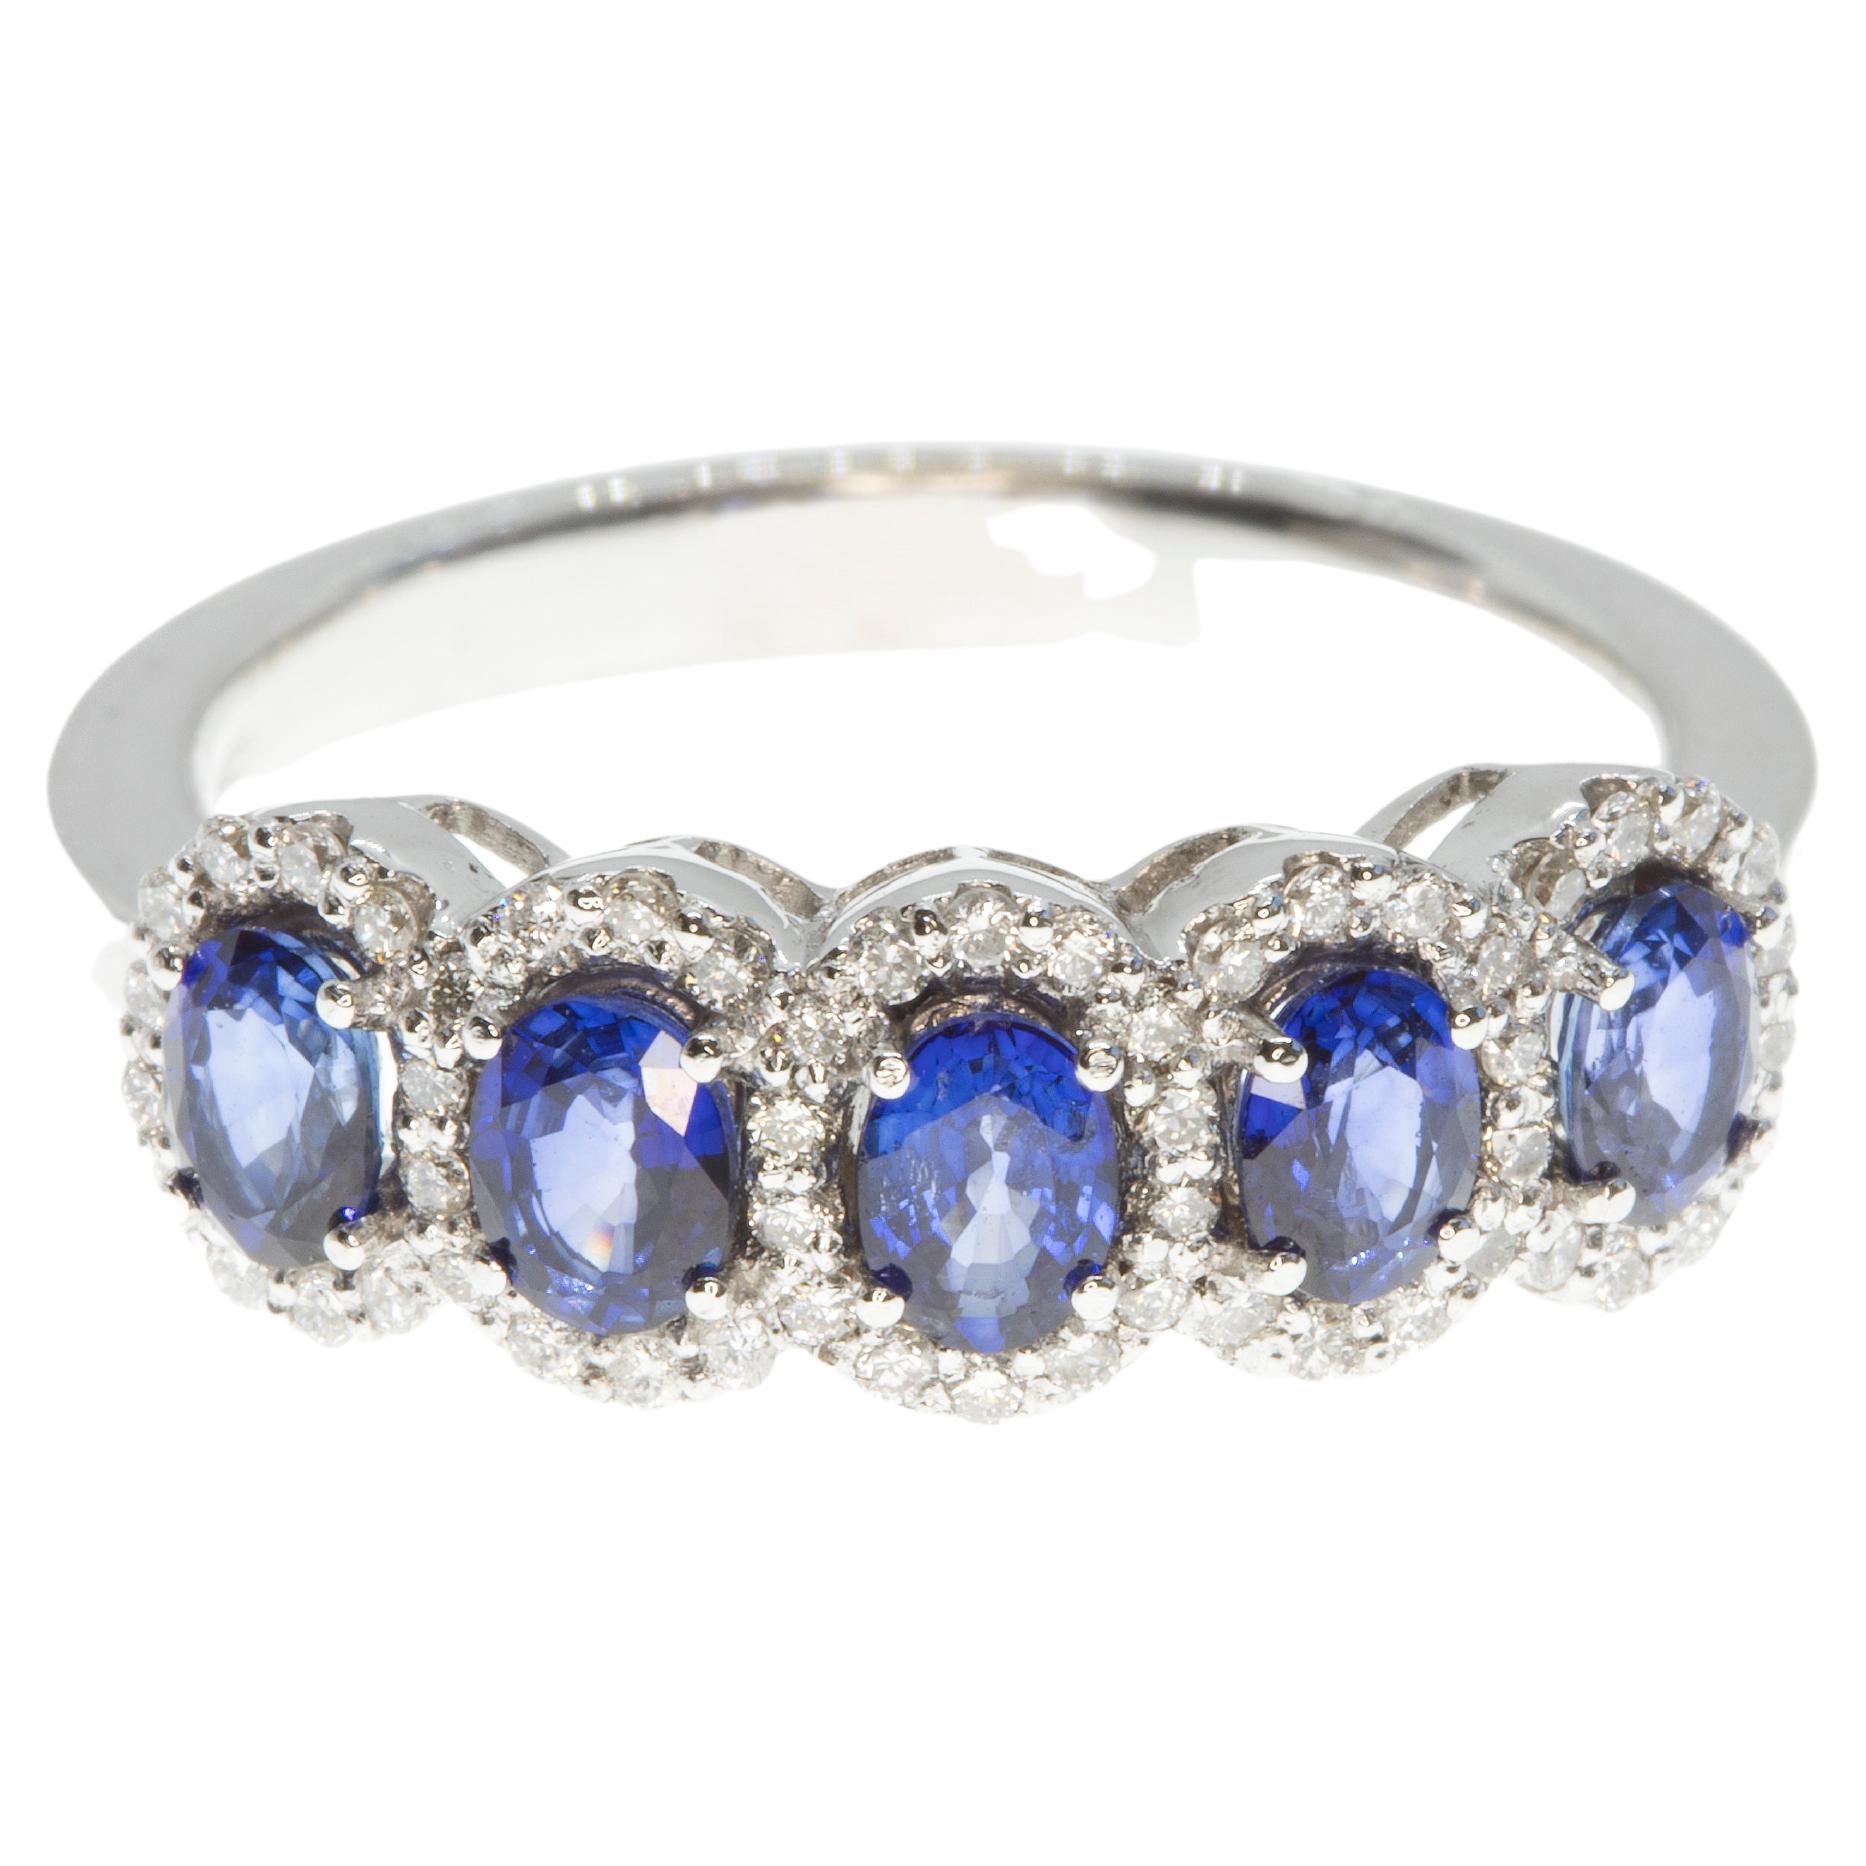 21st Century 18 Karat White Gold Diamond and Sapphire Cocktail Anniversary Ring For Sale